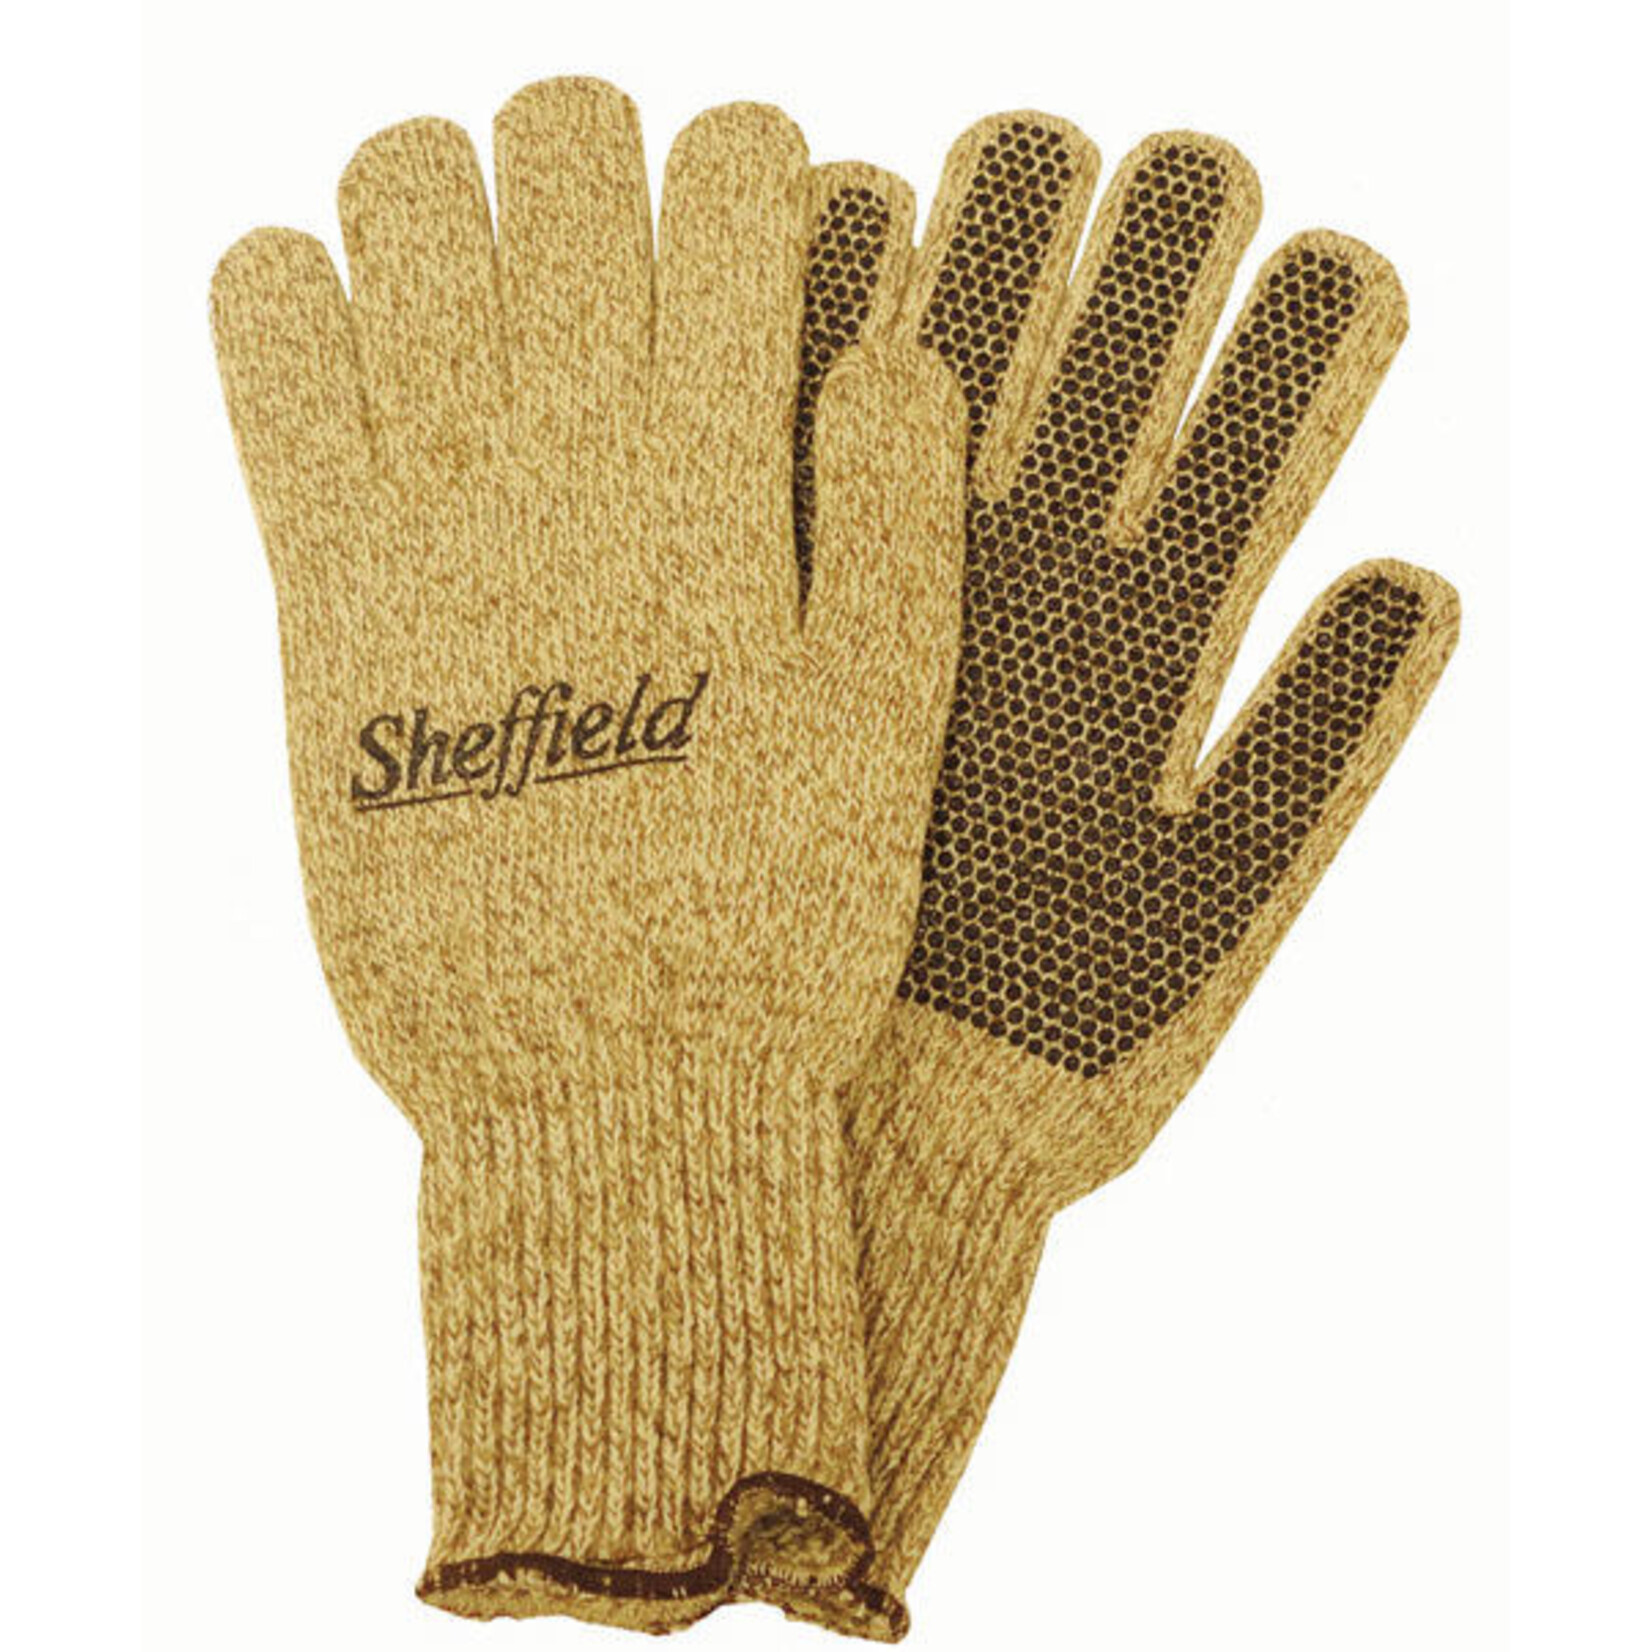 Sheffield Fishing Products Sheffield Gloves